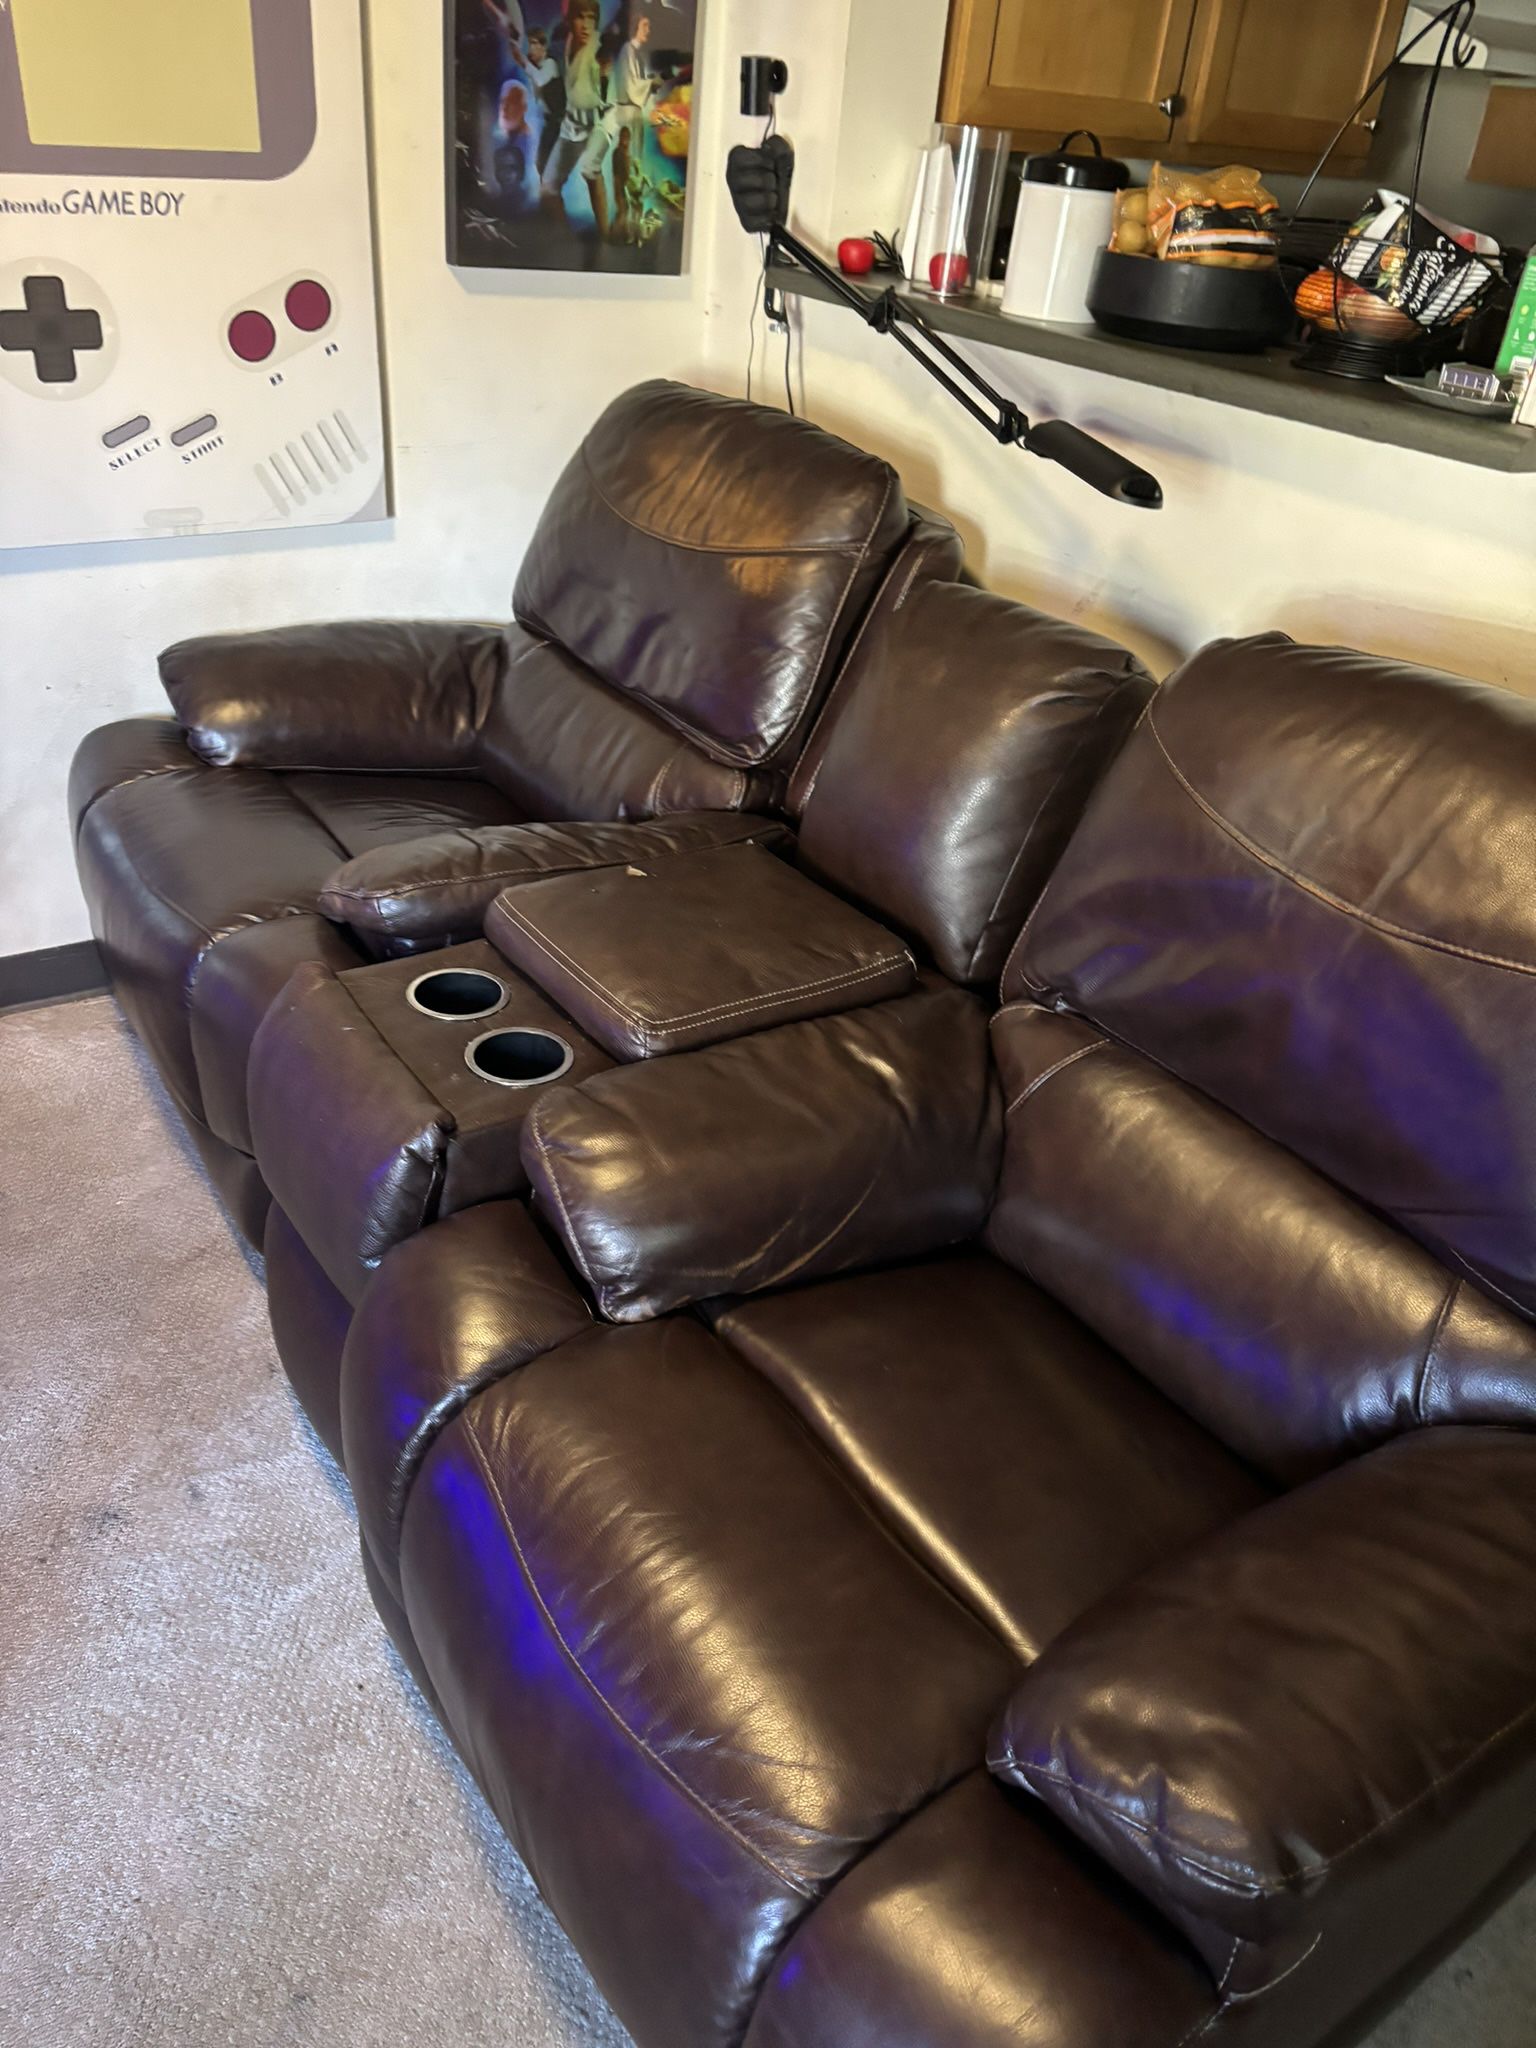 Leather Lazy Boy Rocker And Recliner 